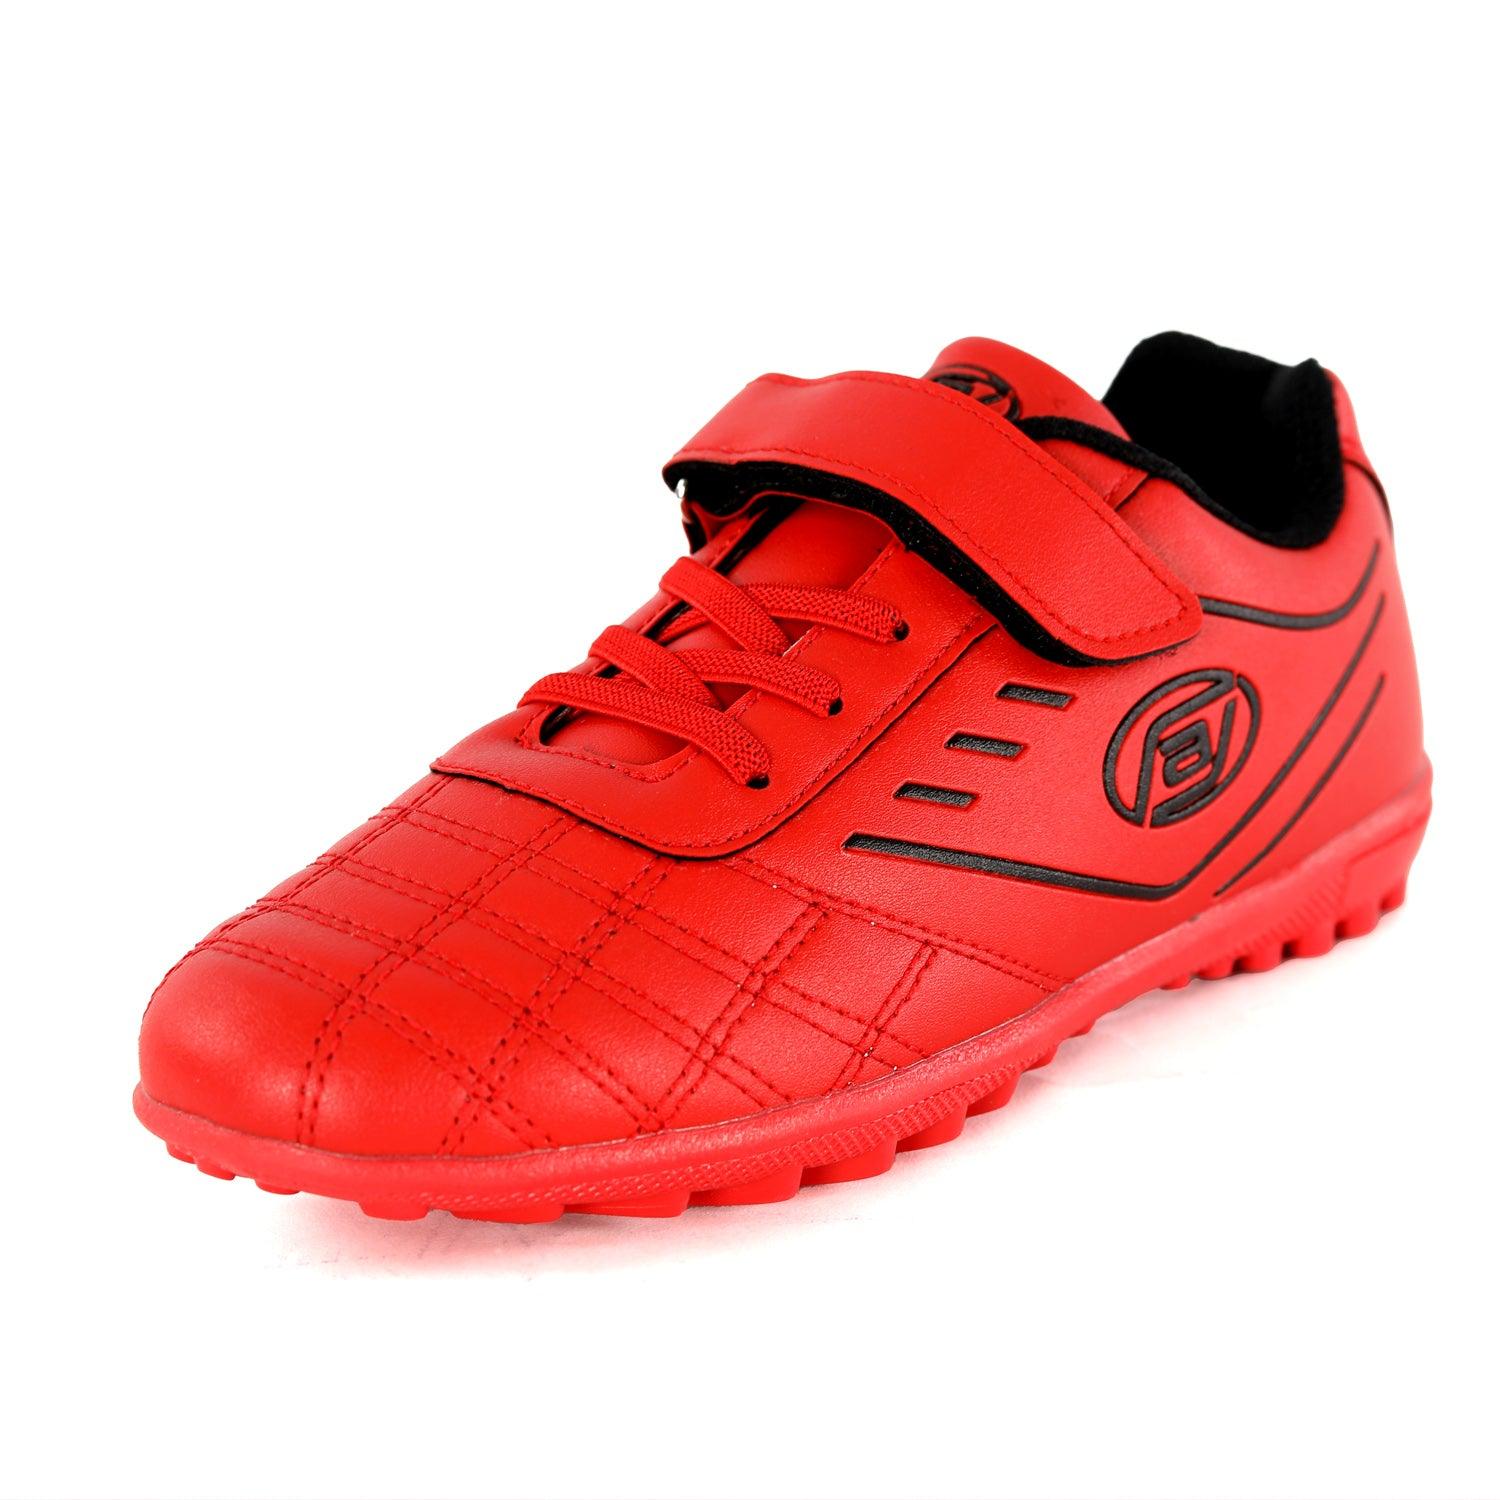 ACTIV BOY'S SOCCER SHOES - RED - Activ Abou Alaa